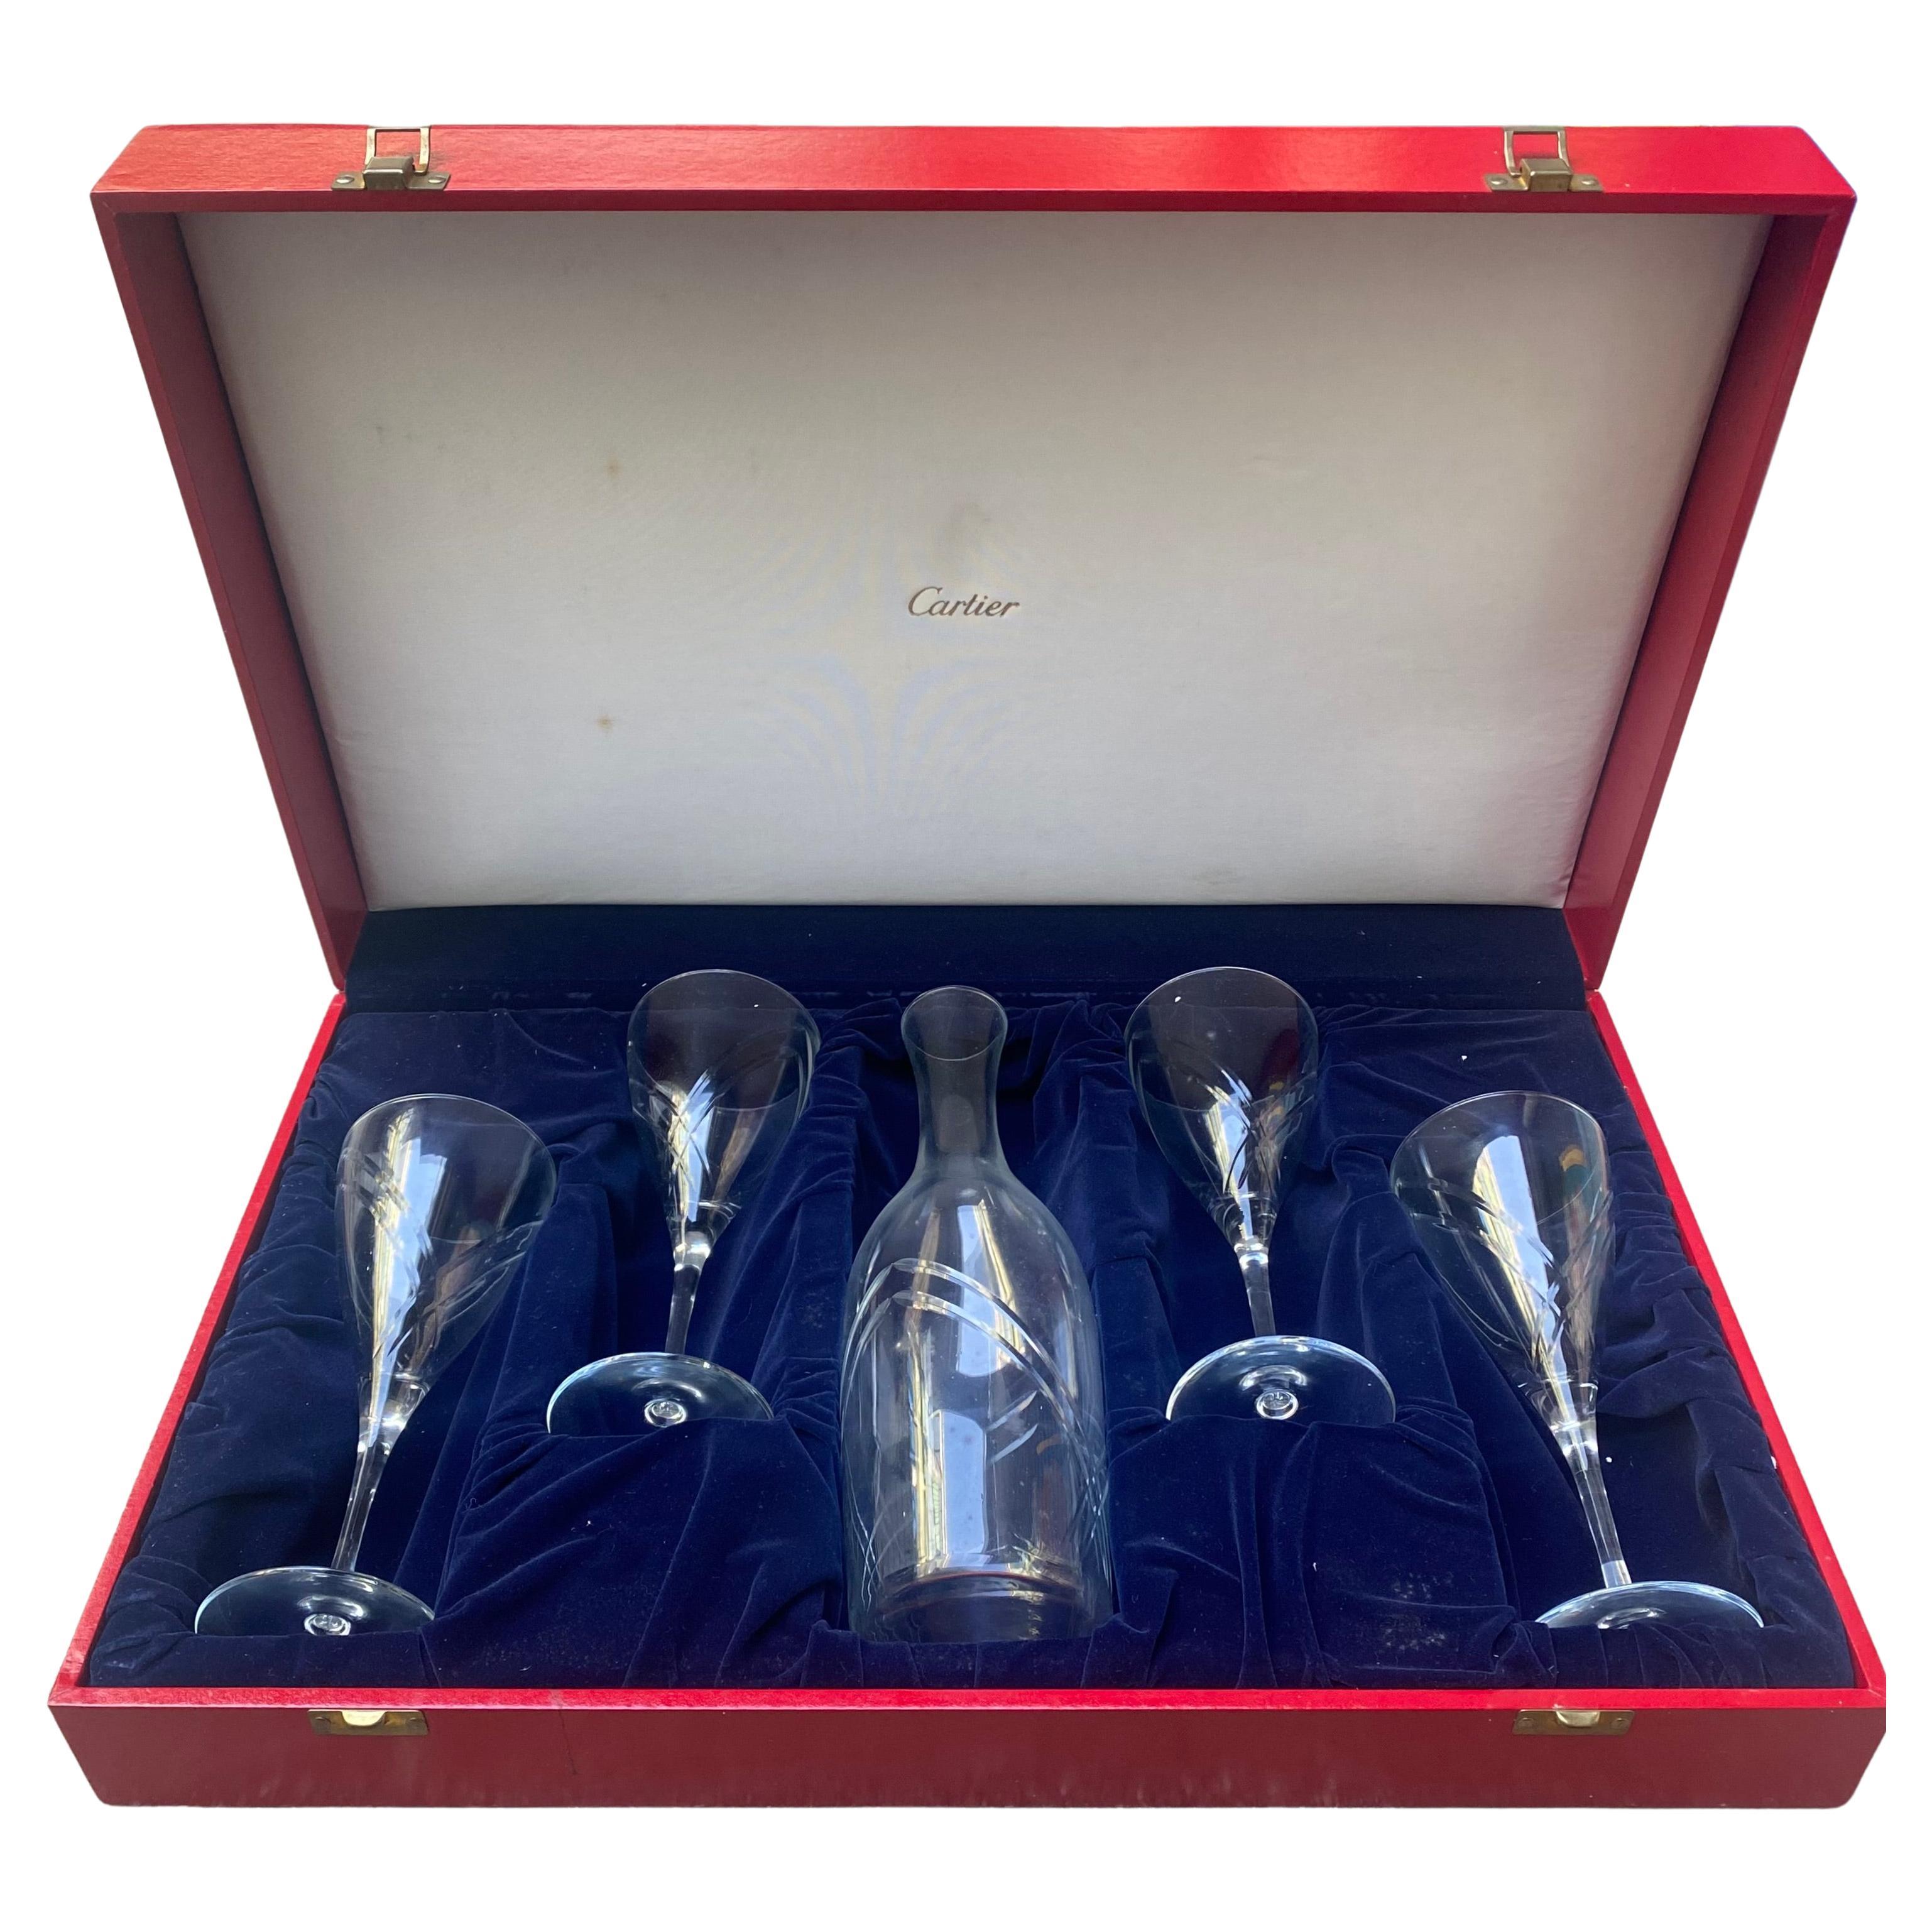 Cartier Box Consisting of 4 Water Glasses and a Crystal Water Carafe - 1960s For Sale